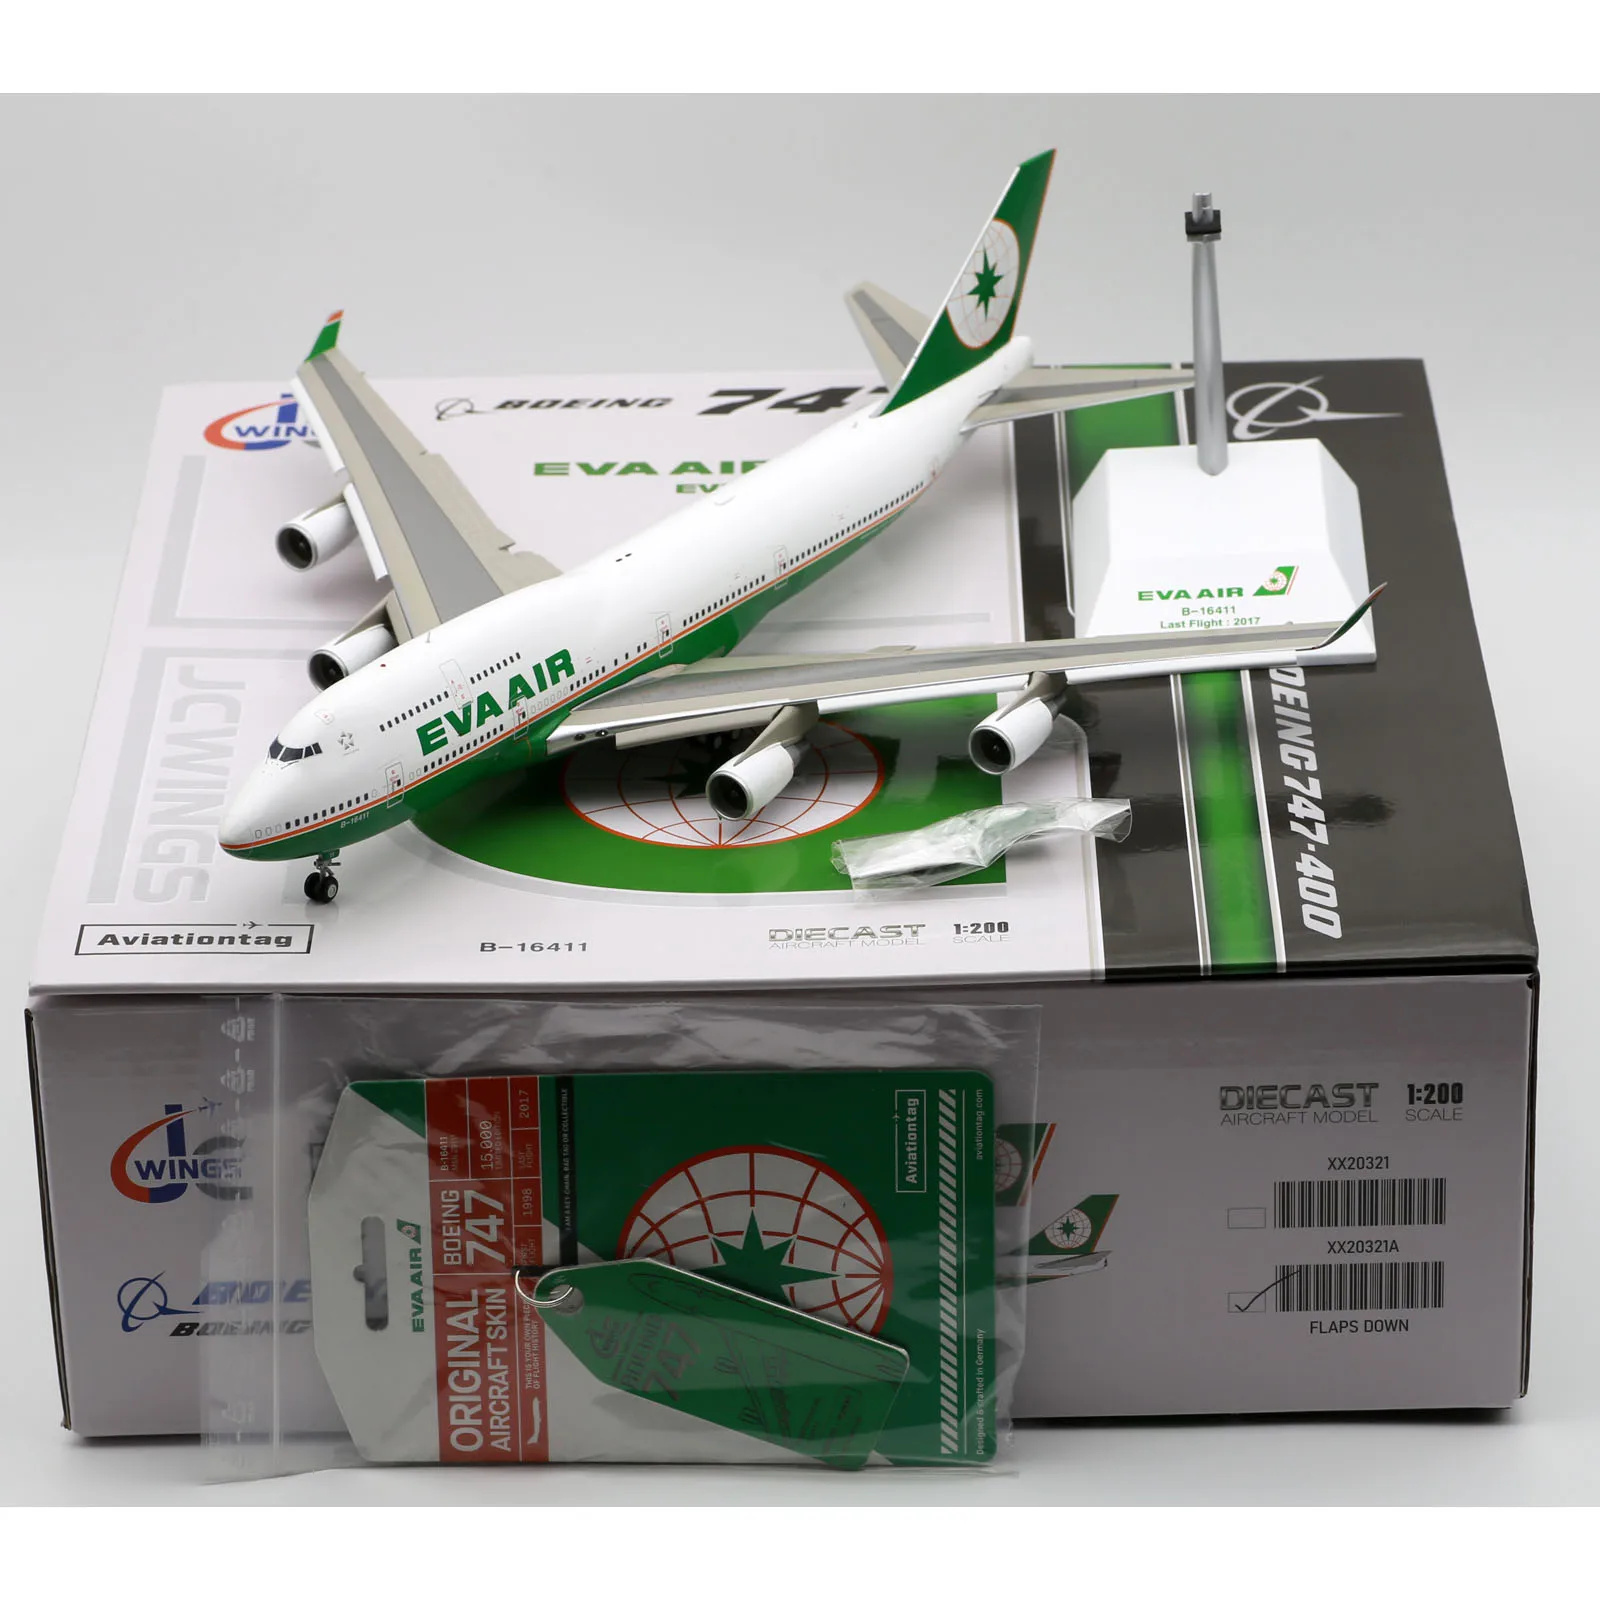 

XX20321A Alloy Collectible Plane Gift JC Wings 1:200 EVA Air Boeing 747-400 Diecast Aircraft Model B-16411 Flap Down Aviationtag